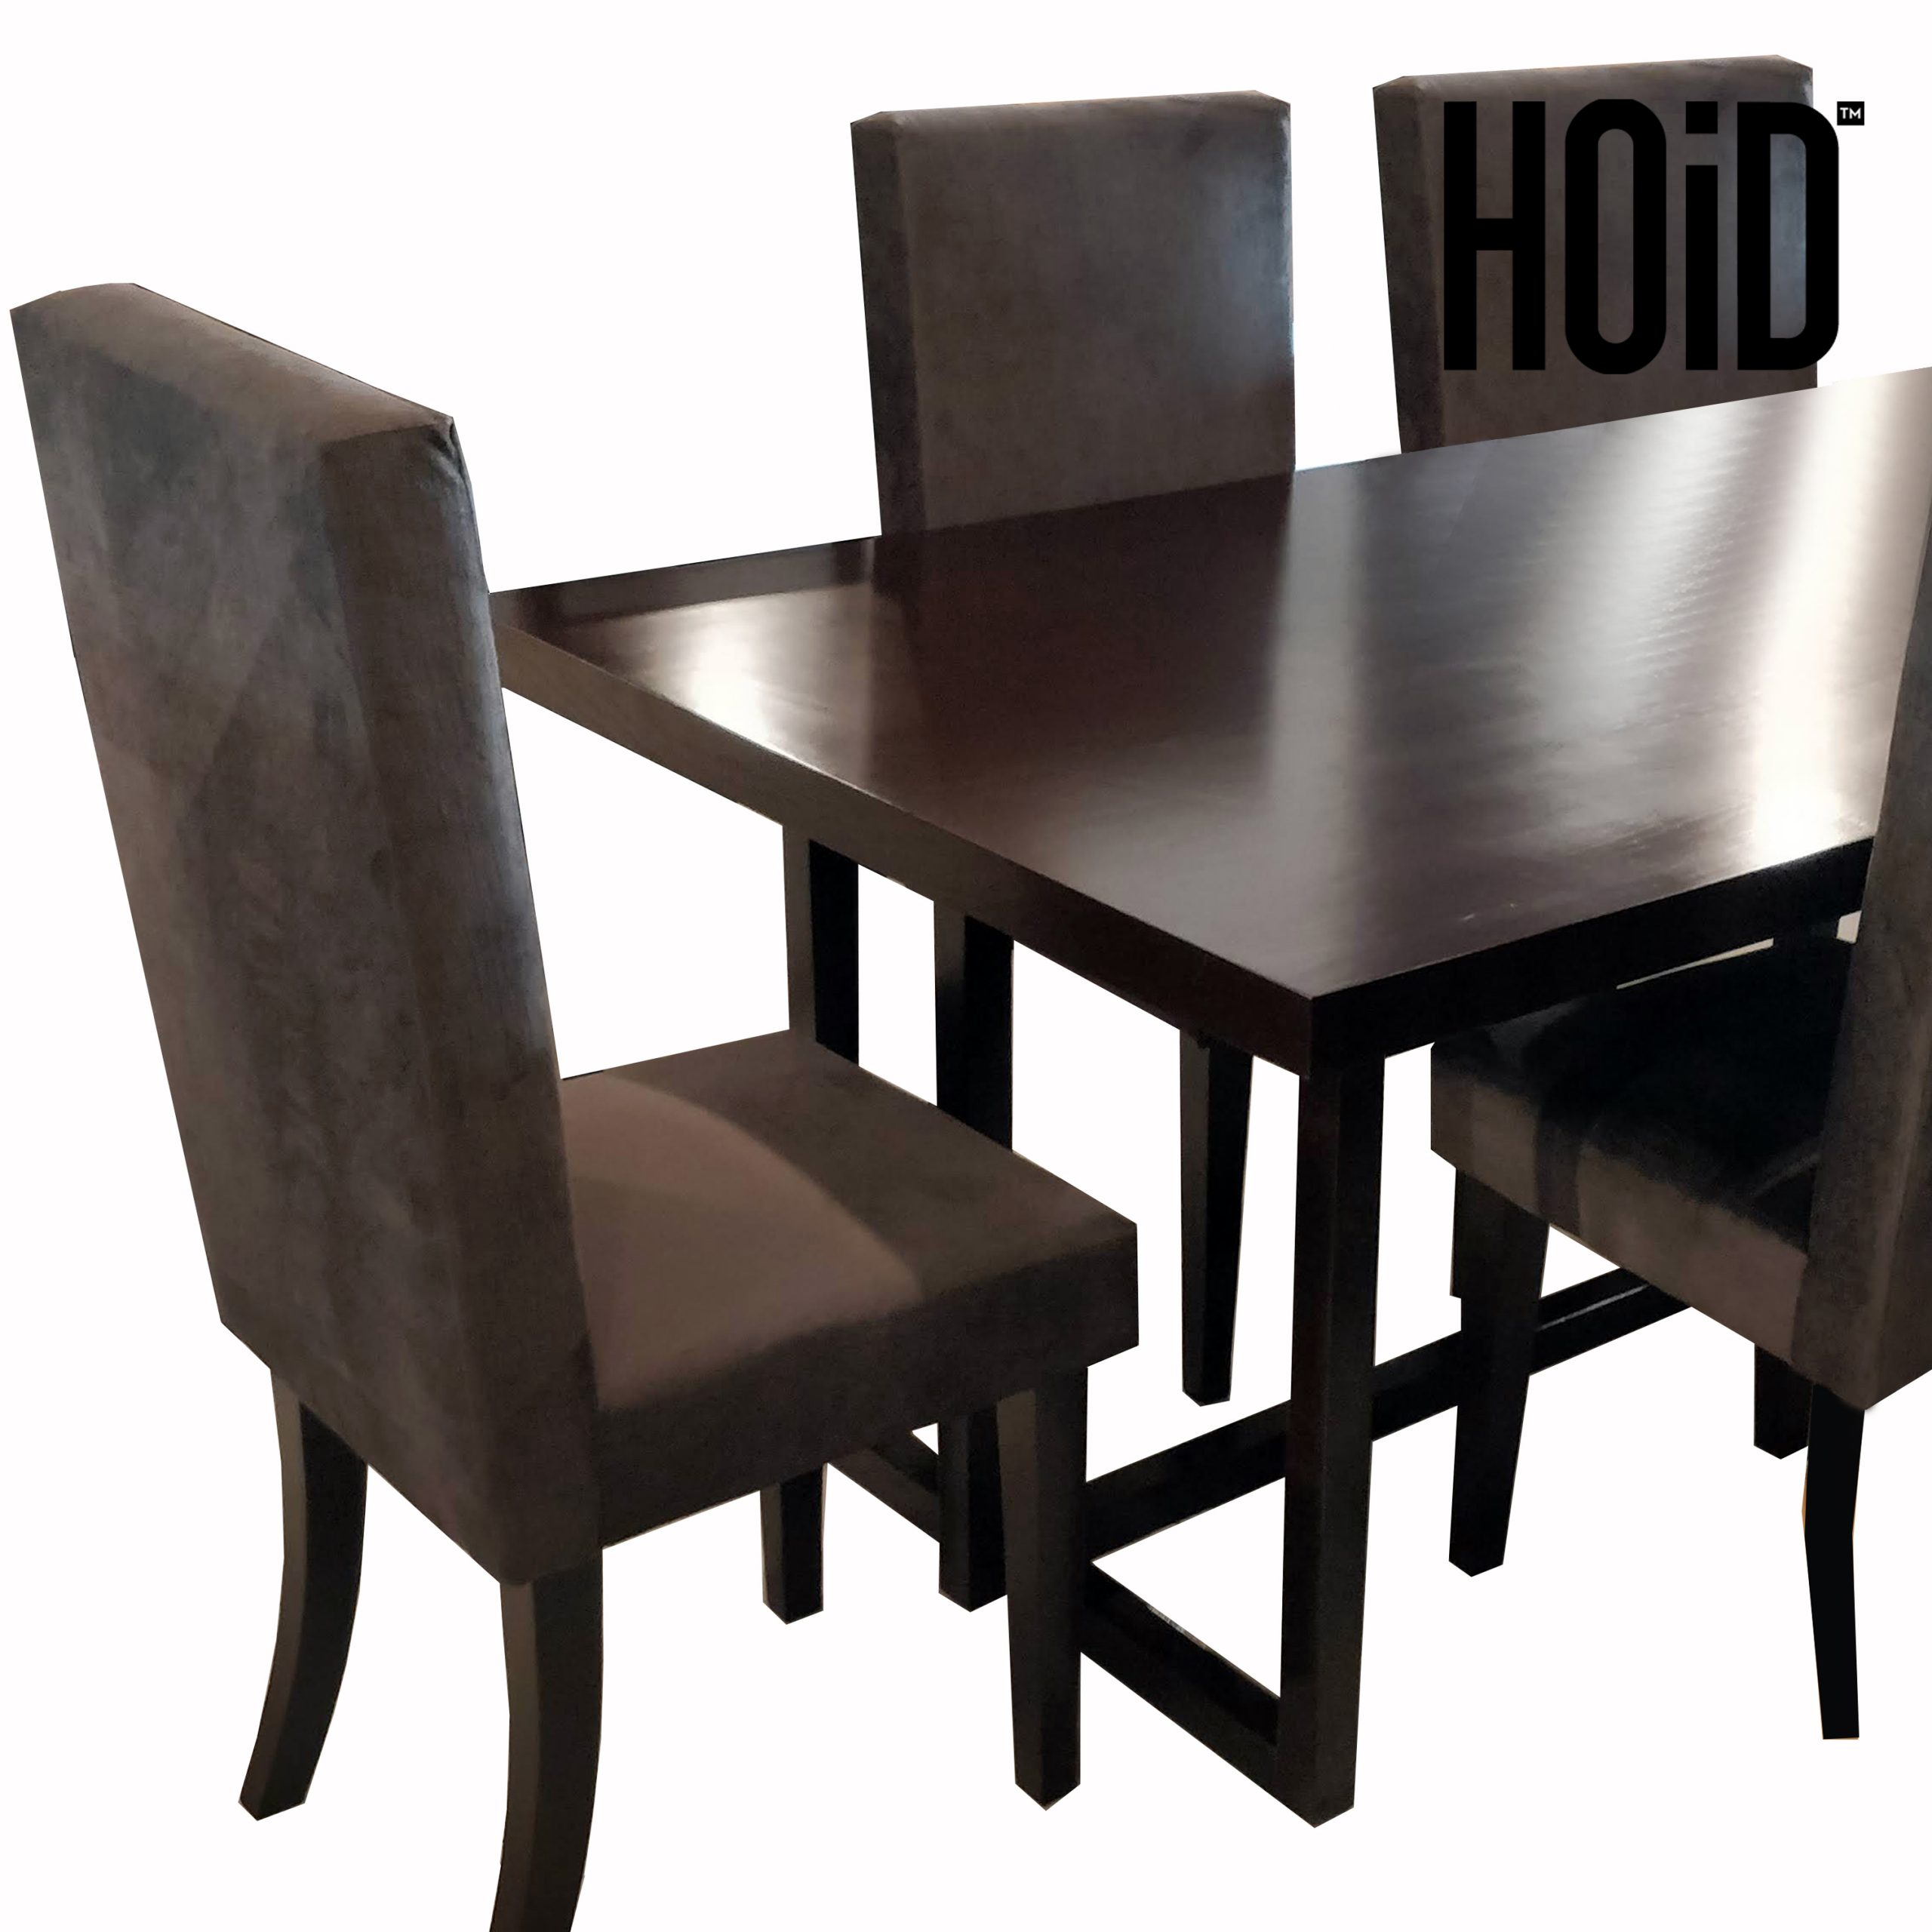 Mit Dining Table With 6 Chairs Hoid Pk, Children S Round Table And Chairs